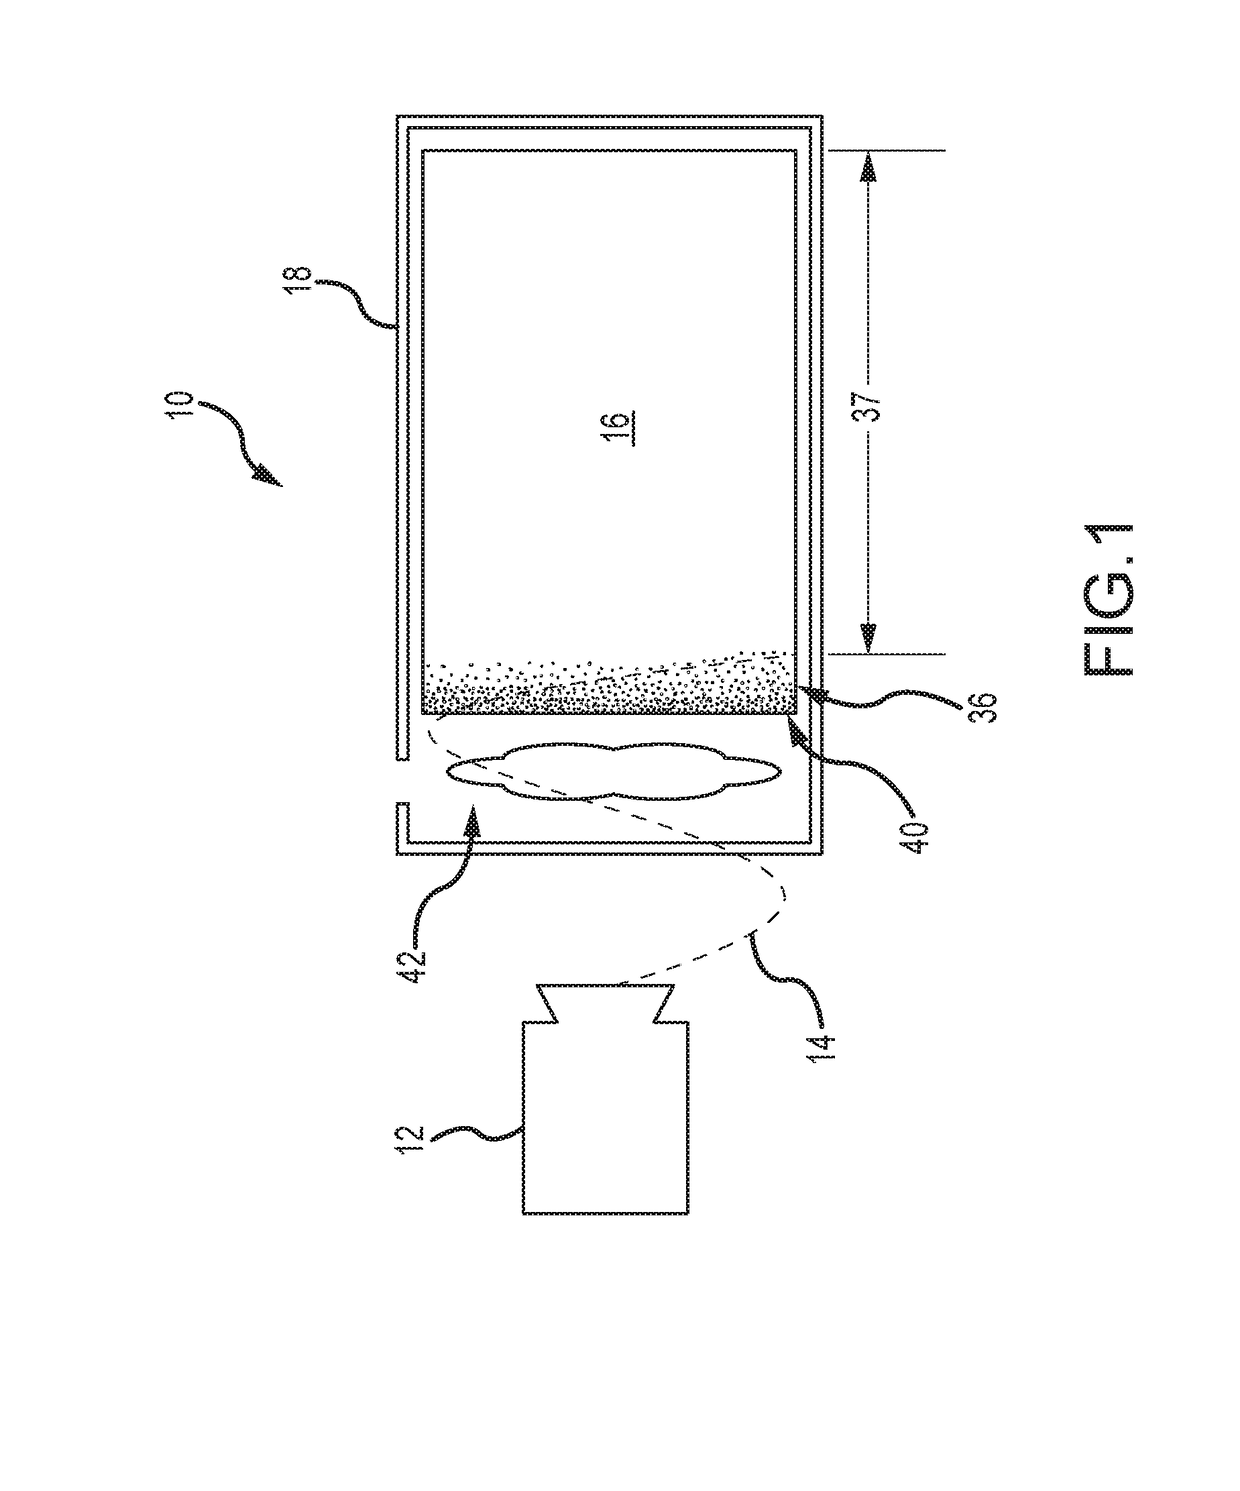 Microwave ignition of electrically operated propellants